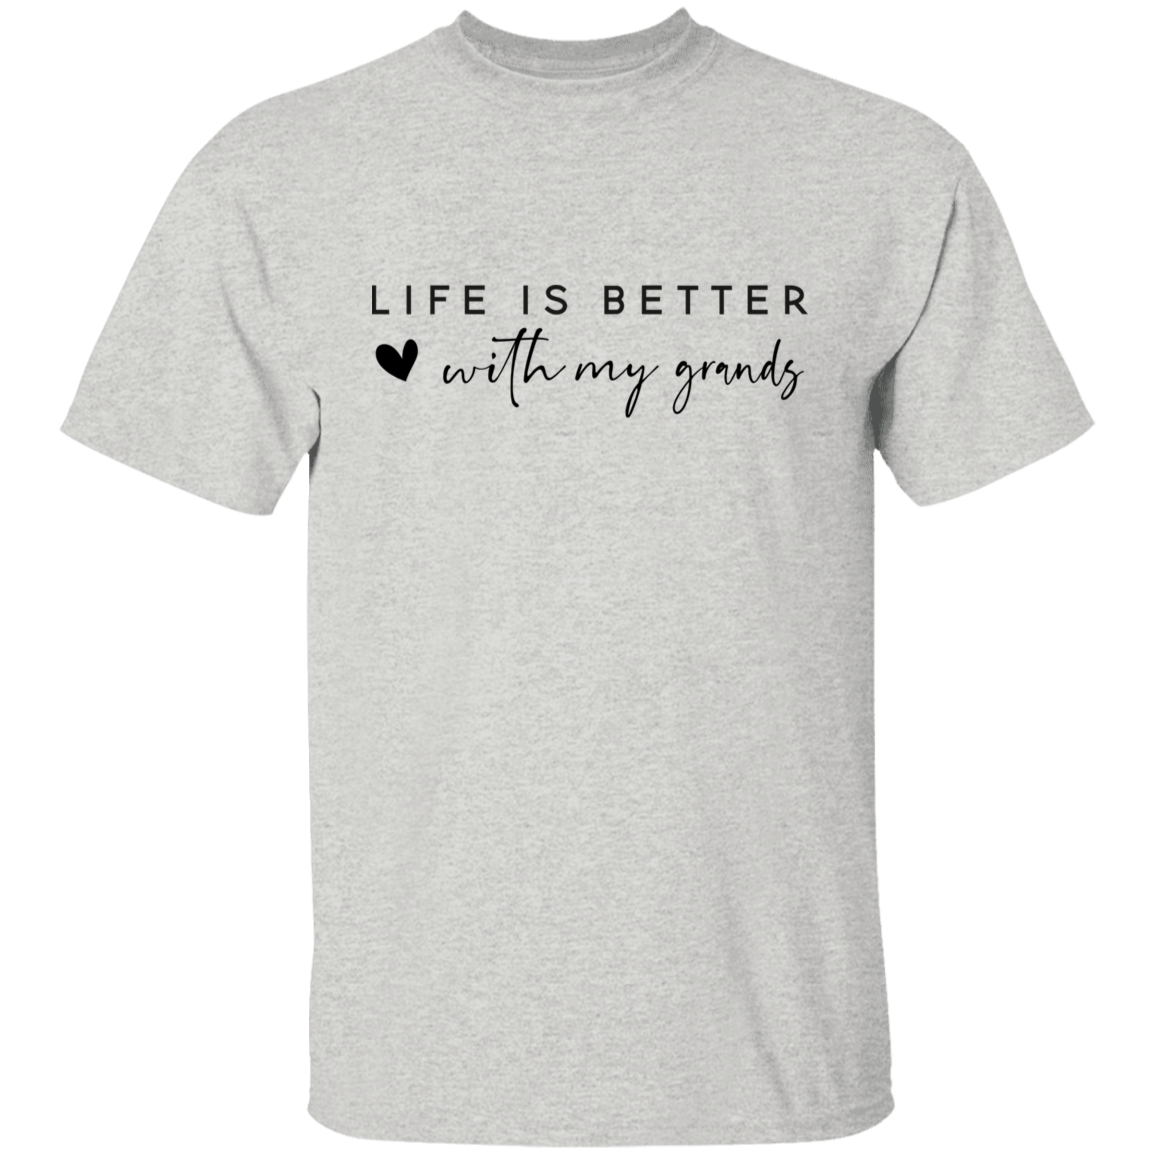 "Life is Better with My Grandy" Youth T-Shirt